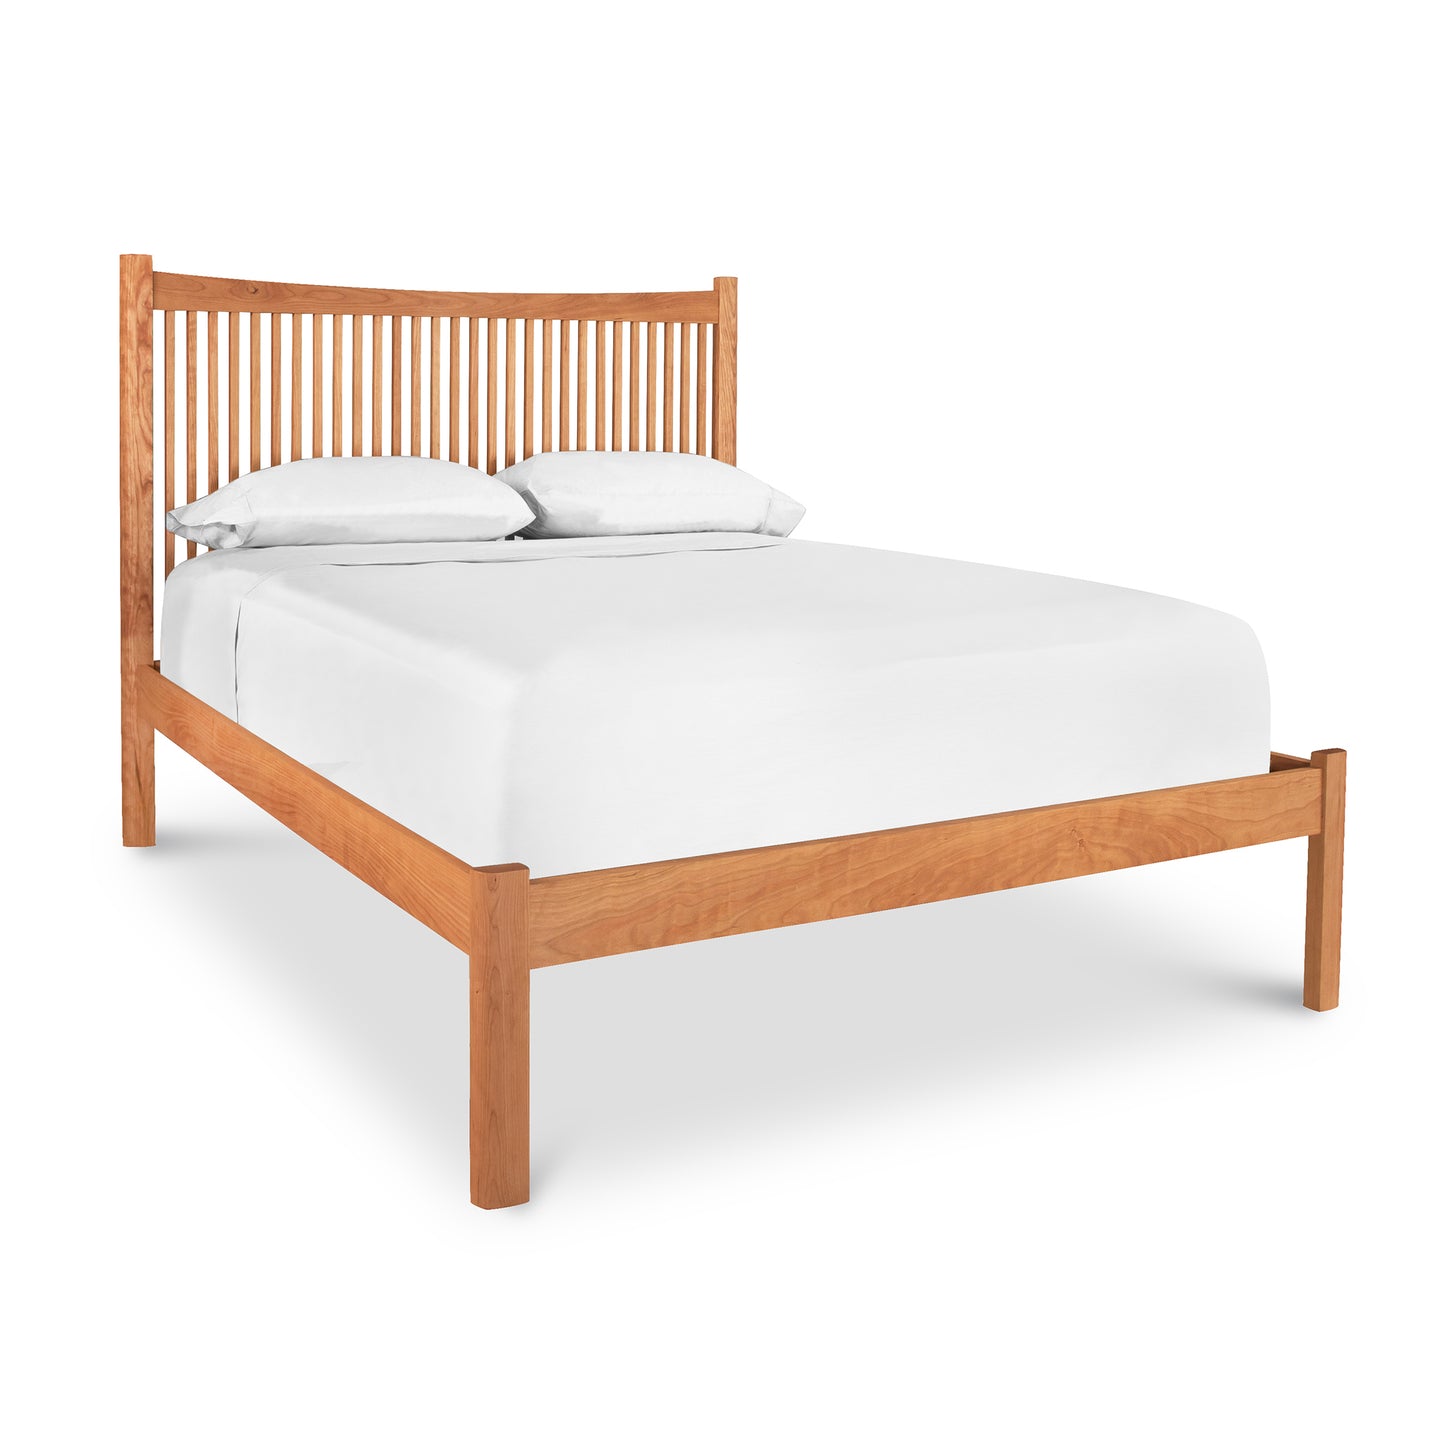 A Heartwood Shaker Low Footboard Bed by Vermont Furniture Designs with white sheets on it.